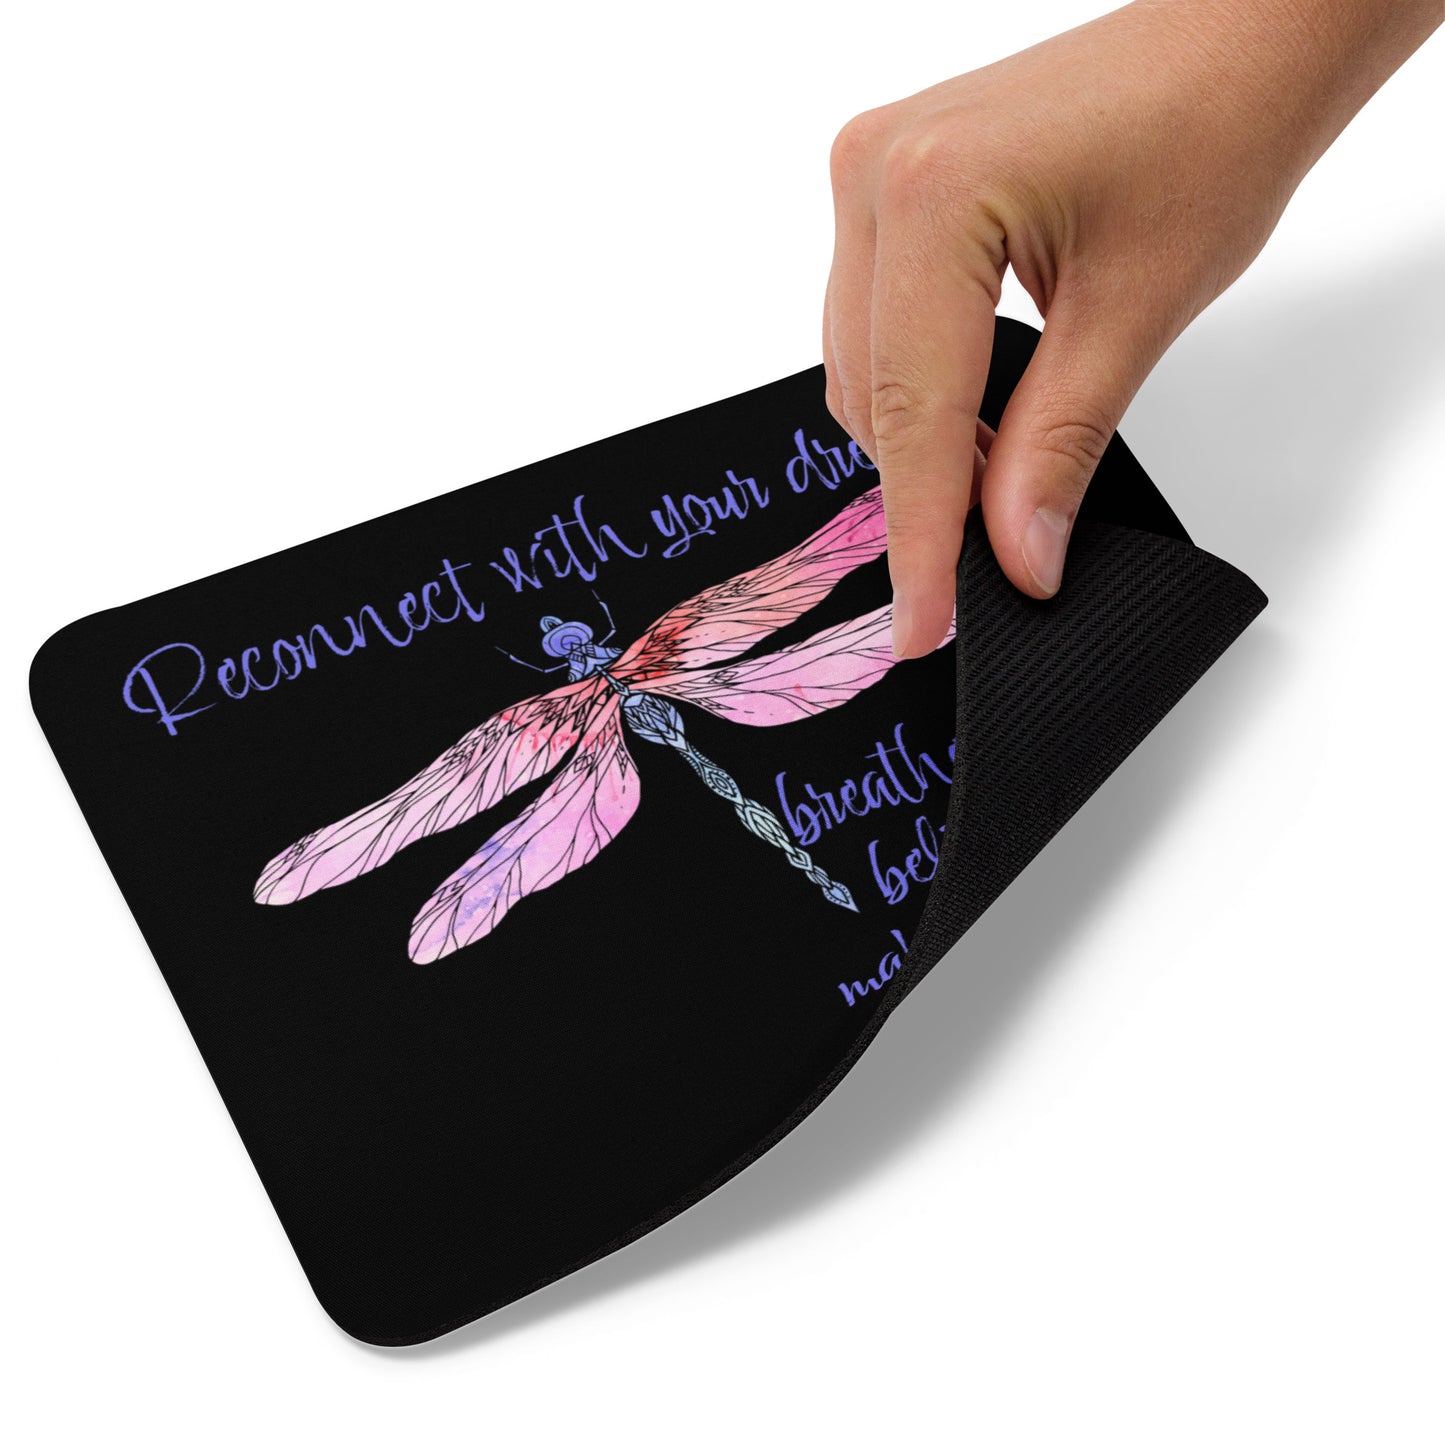 Reconnect With Your Dreams Mouse pad